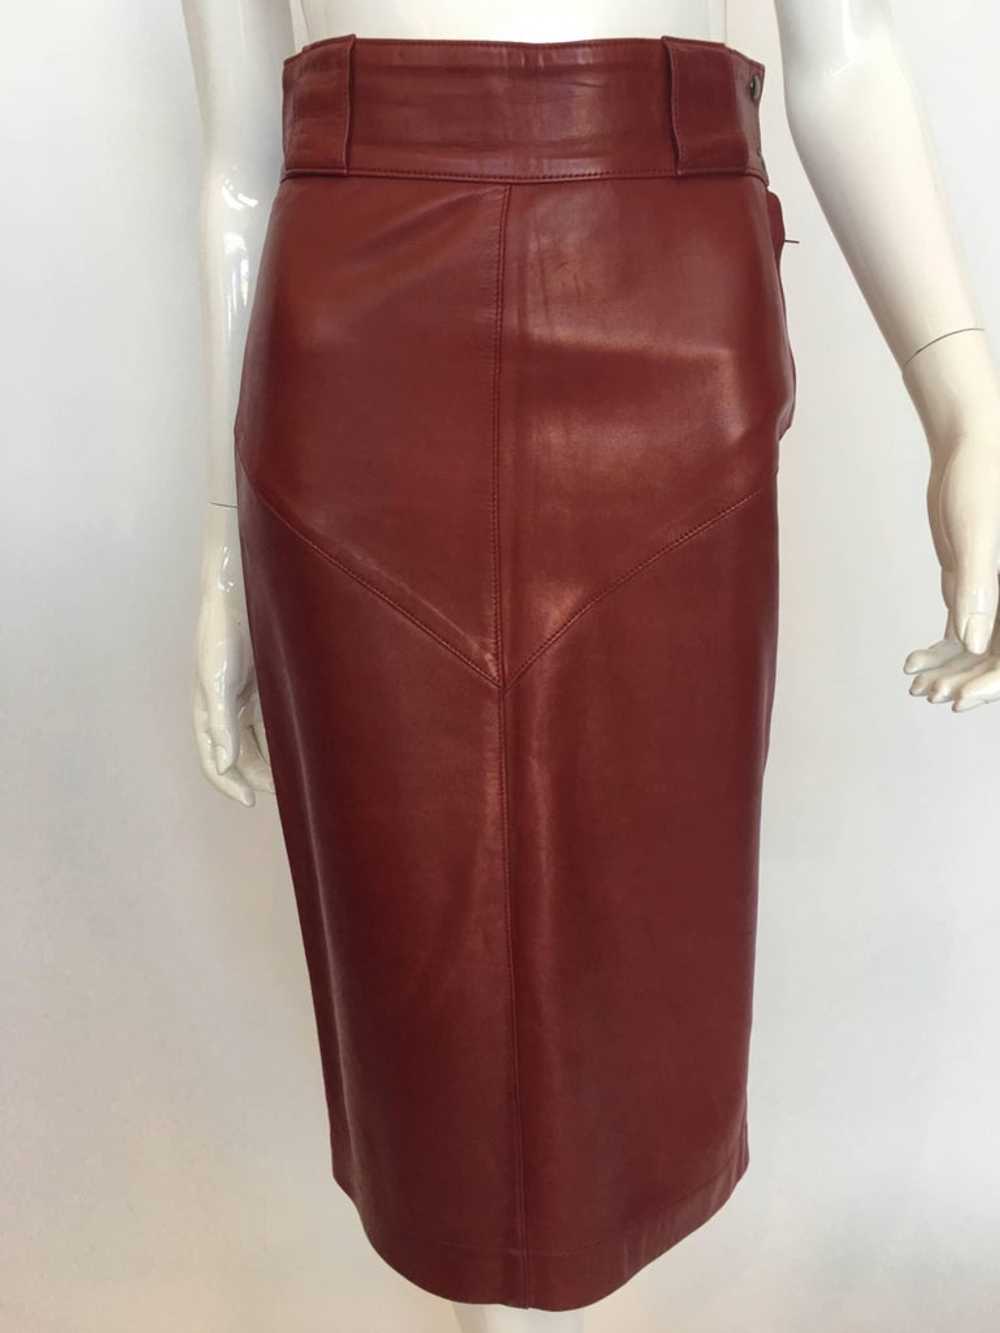 Alaïa 1980's Red Leather Skirt Suit - image 7